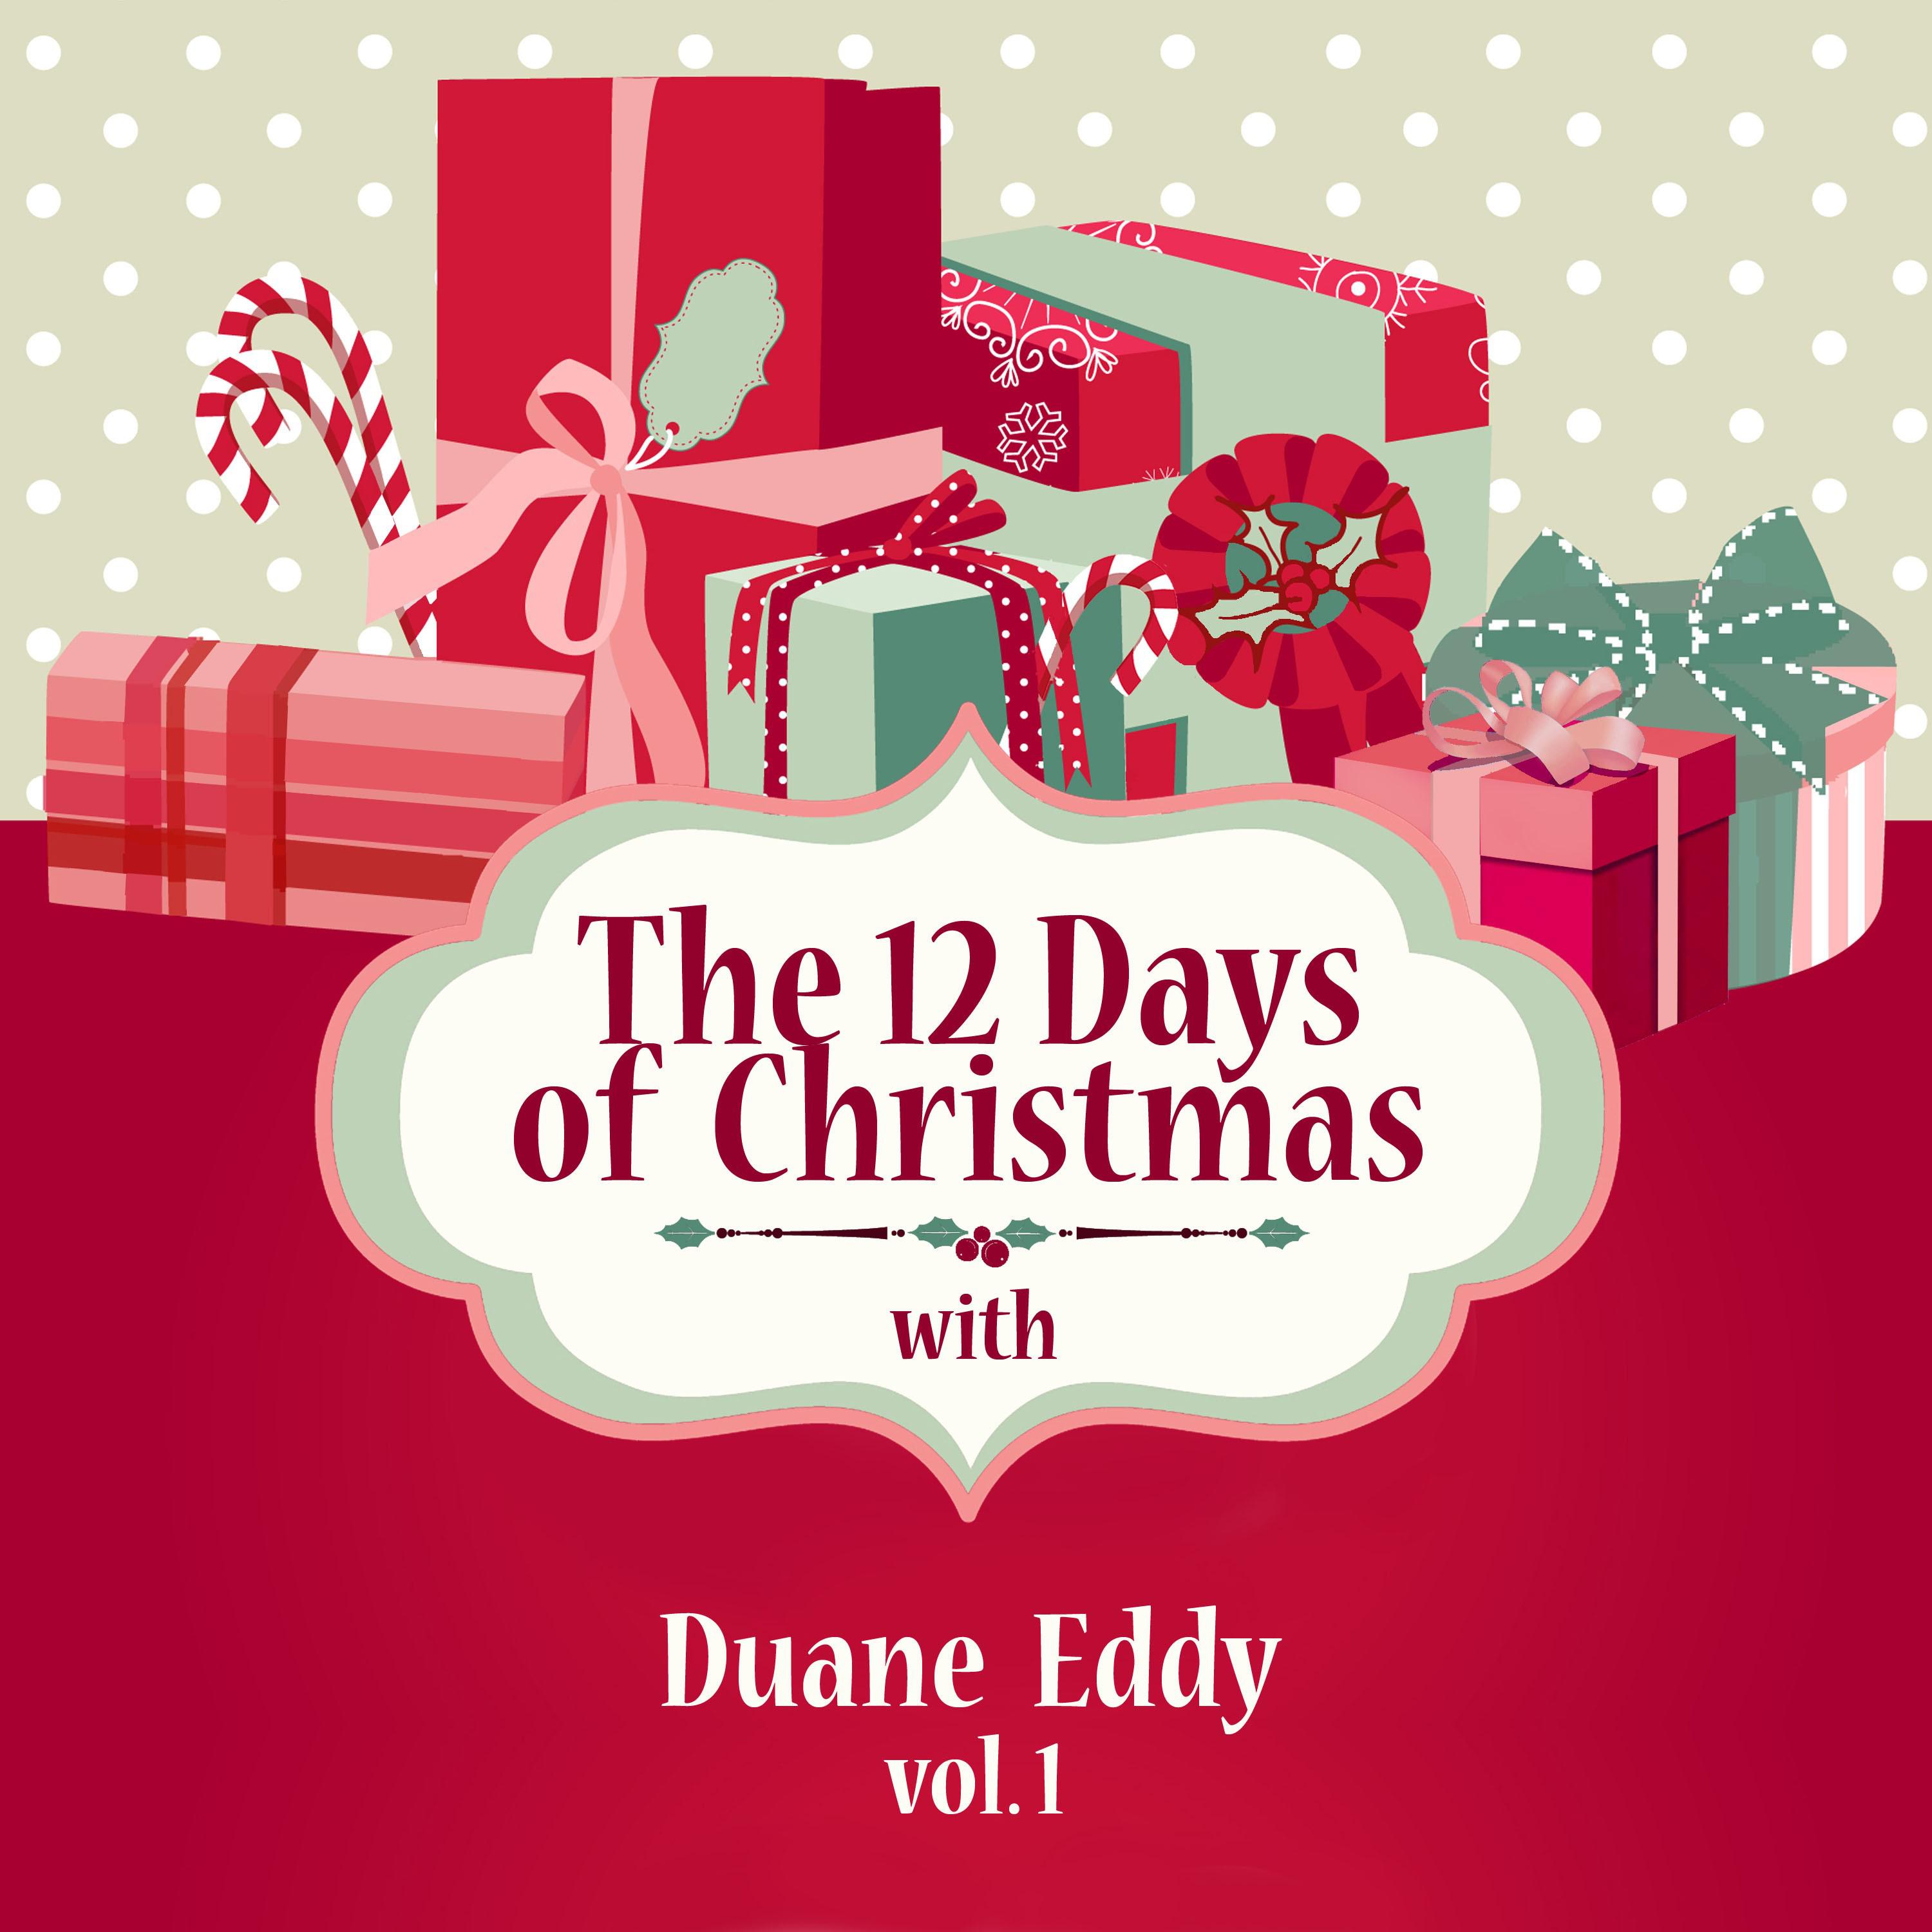 The 12 Days of Christmas with Duane Eddy, Vol. 1